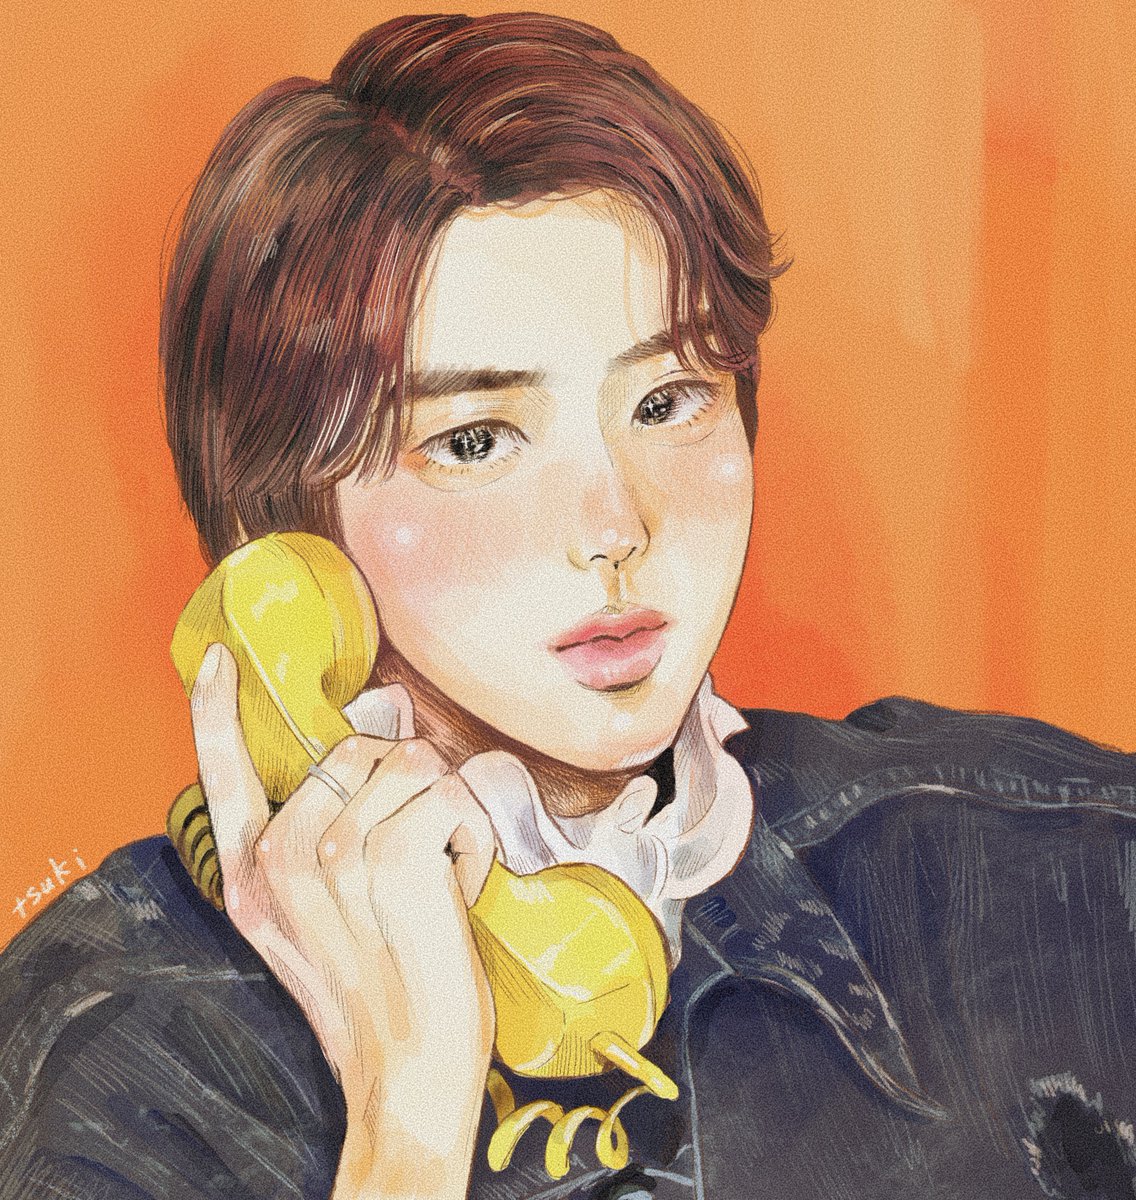 「#1YearWithButter
#jin 」|𝚝𝚜𝚞𝚔𝚒🌼𝚜𝚕𝚘𝚠のイラスト